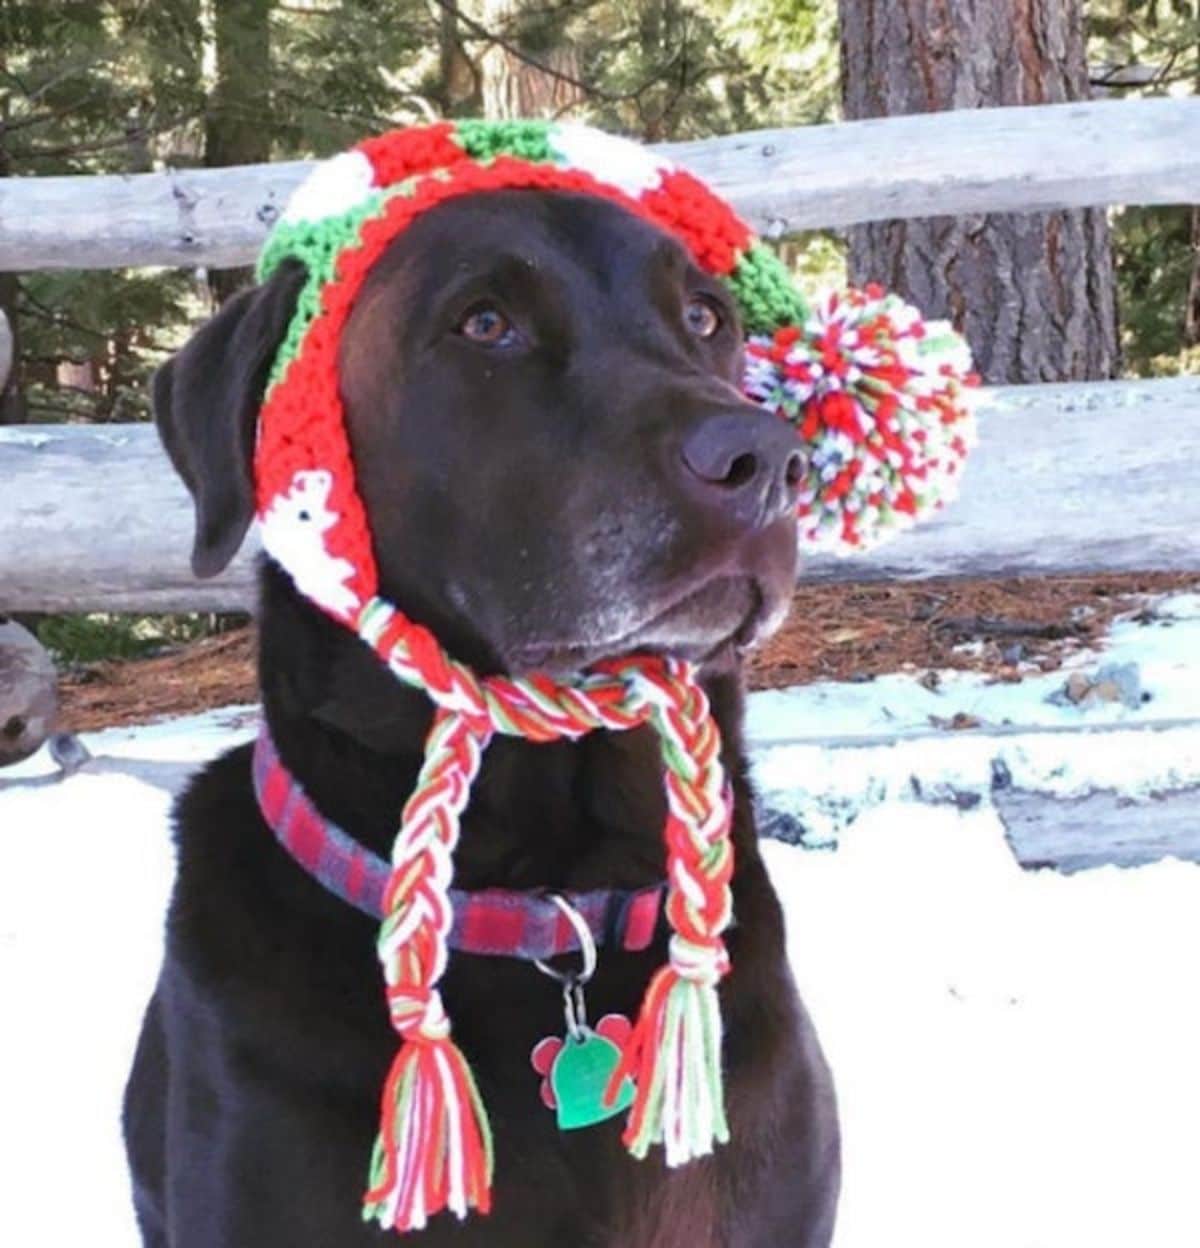 black labrador retriever wearing a red green and white festive crocheted hat tied under the chin